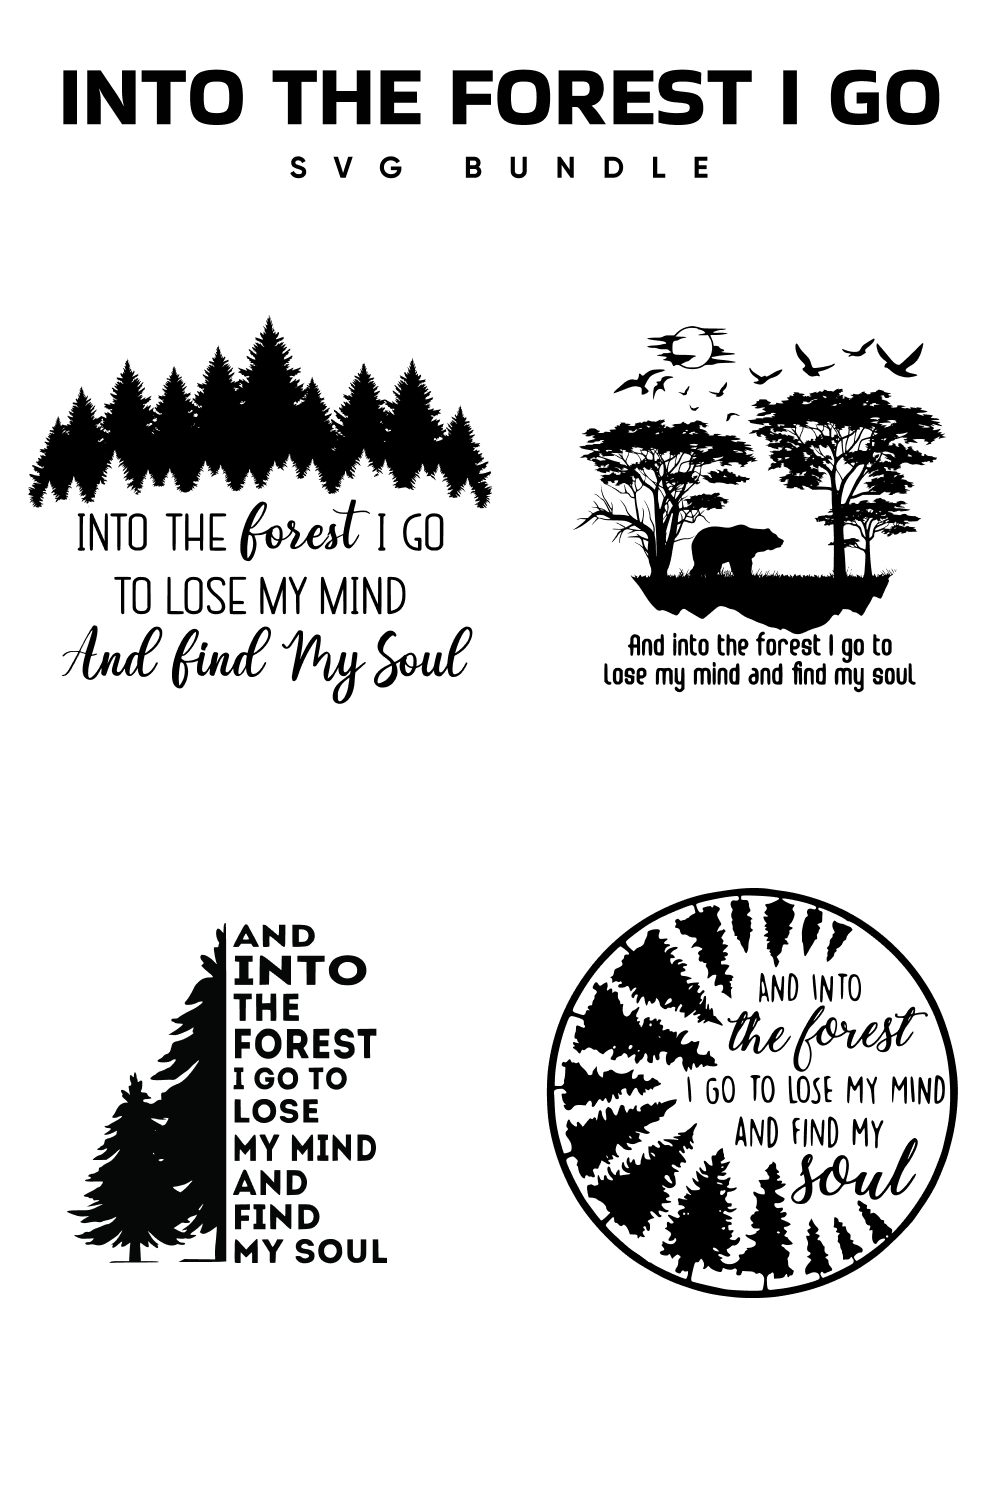 01. into the forest i go svg bundle 1000 x 1500 580